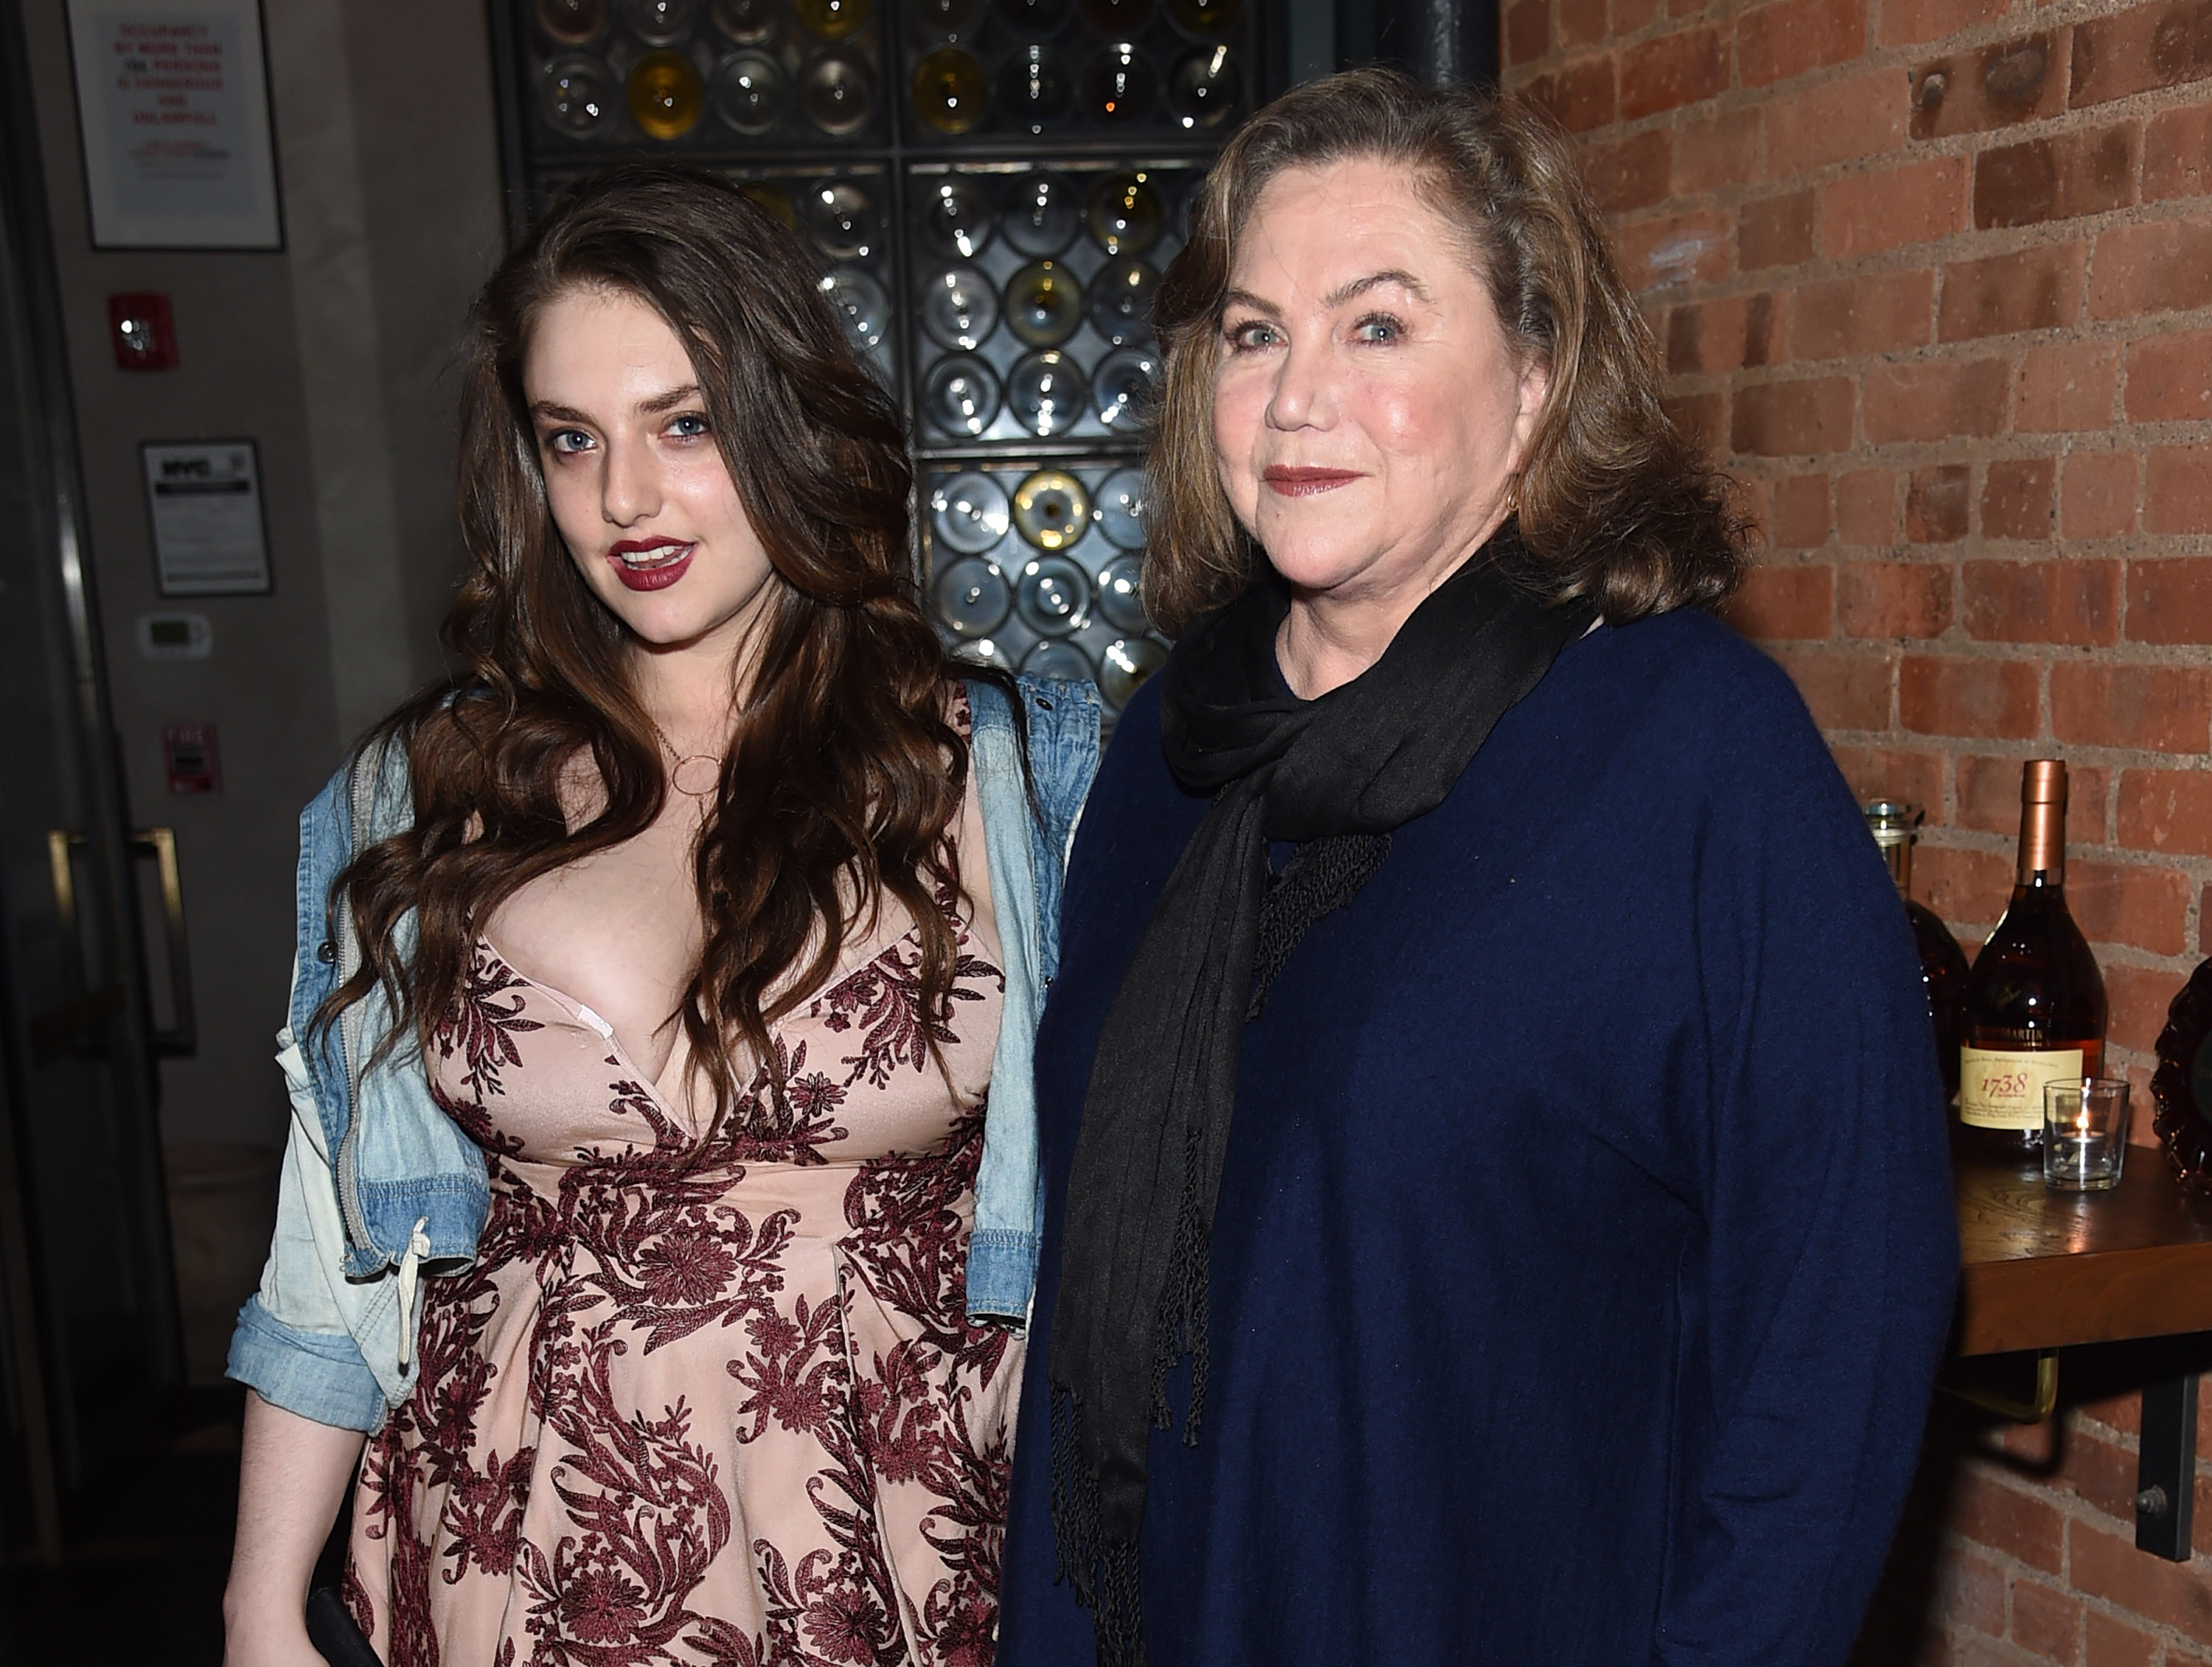 Rachel Ann Weiss and Kathleen Turner at Chef's Club on May 23, 2017 in New York City | Source: Getty Images